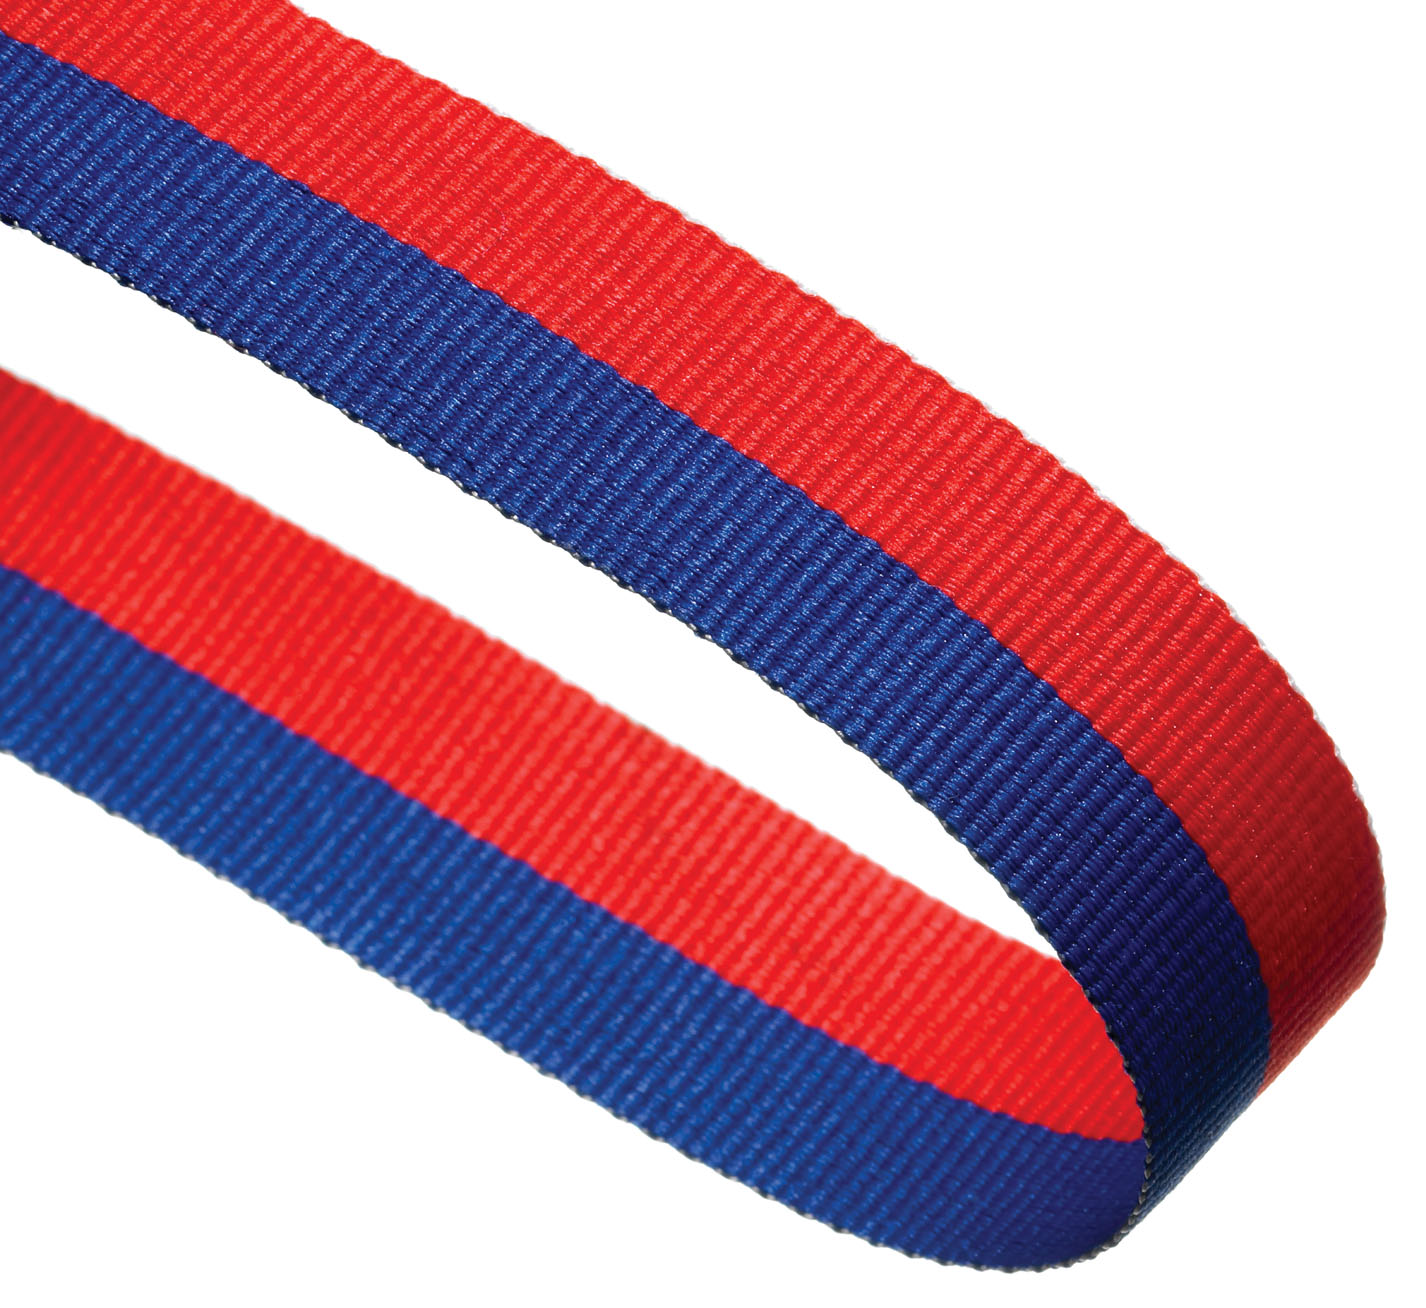 Blue / Red Woven Medal Ribbons With Clip